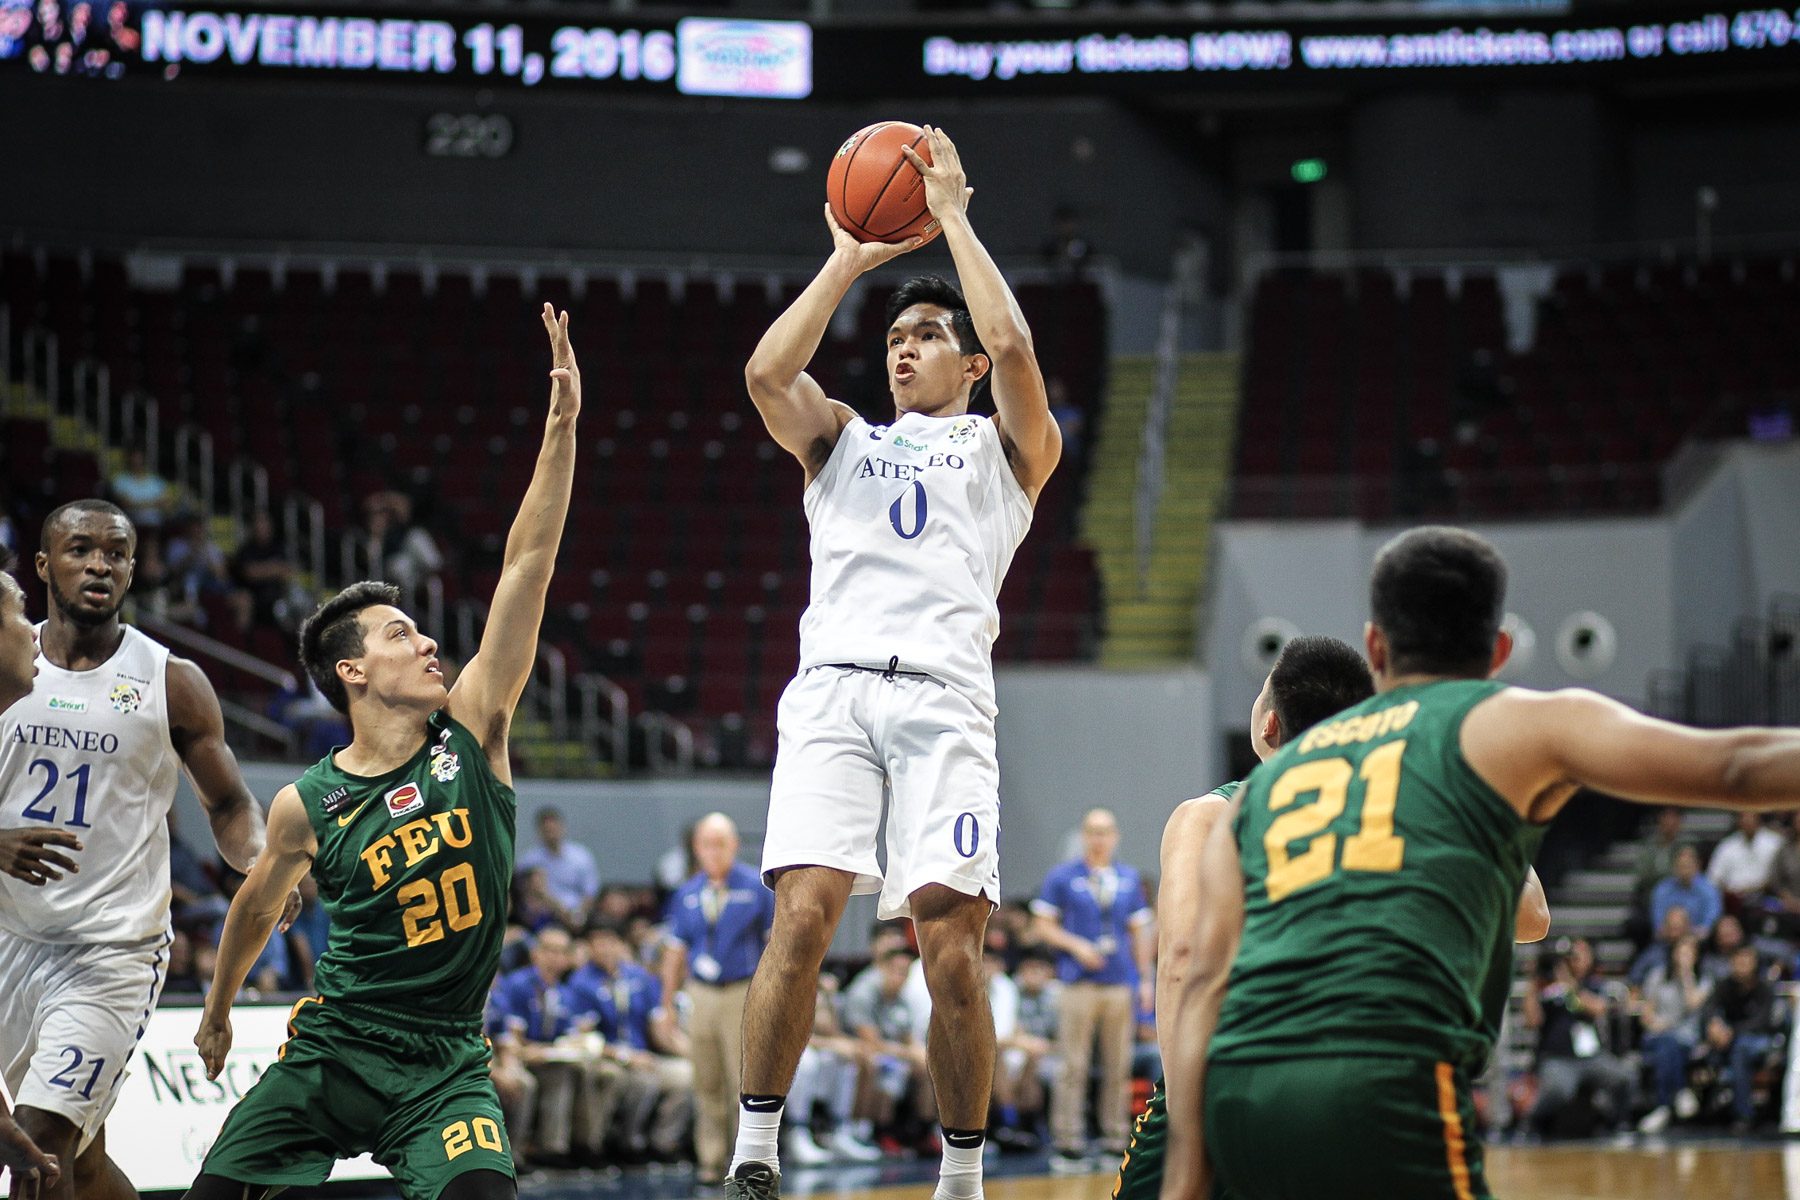 Thirdy Ravena stays positive as Ateneo heads into do-or-die vs FEU